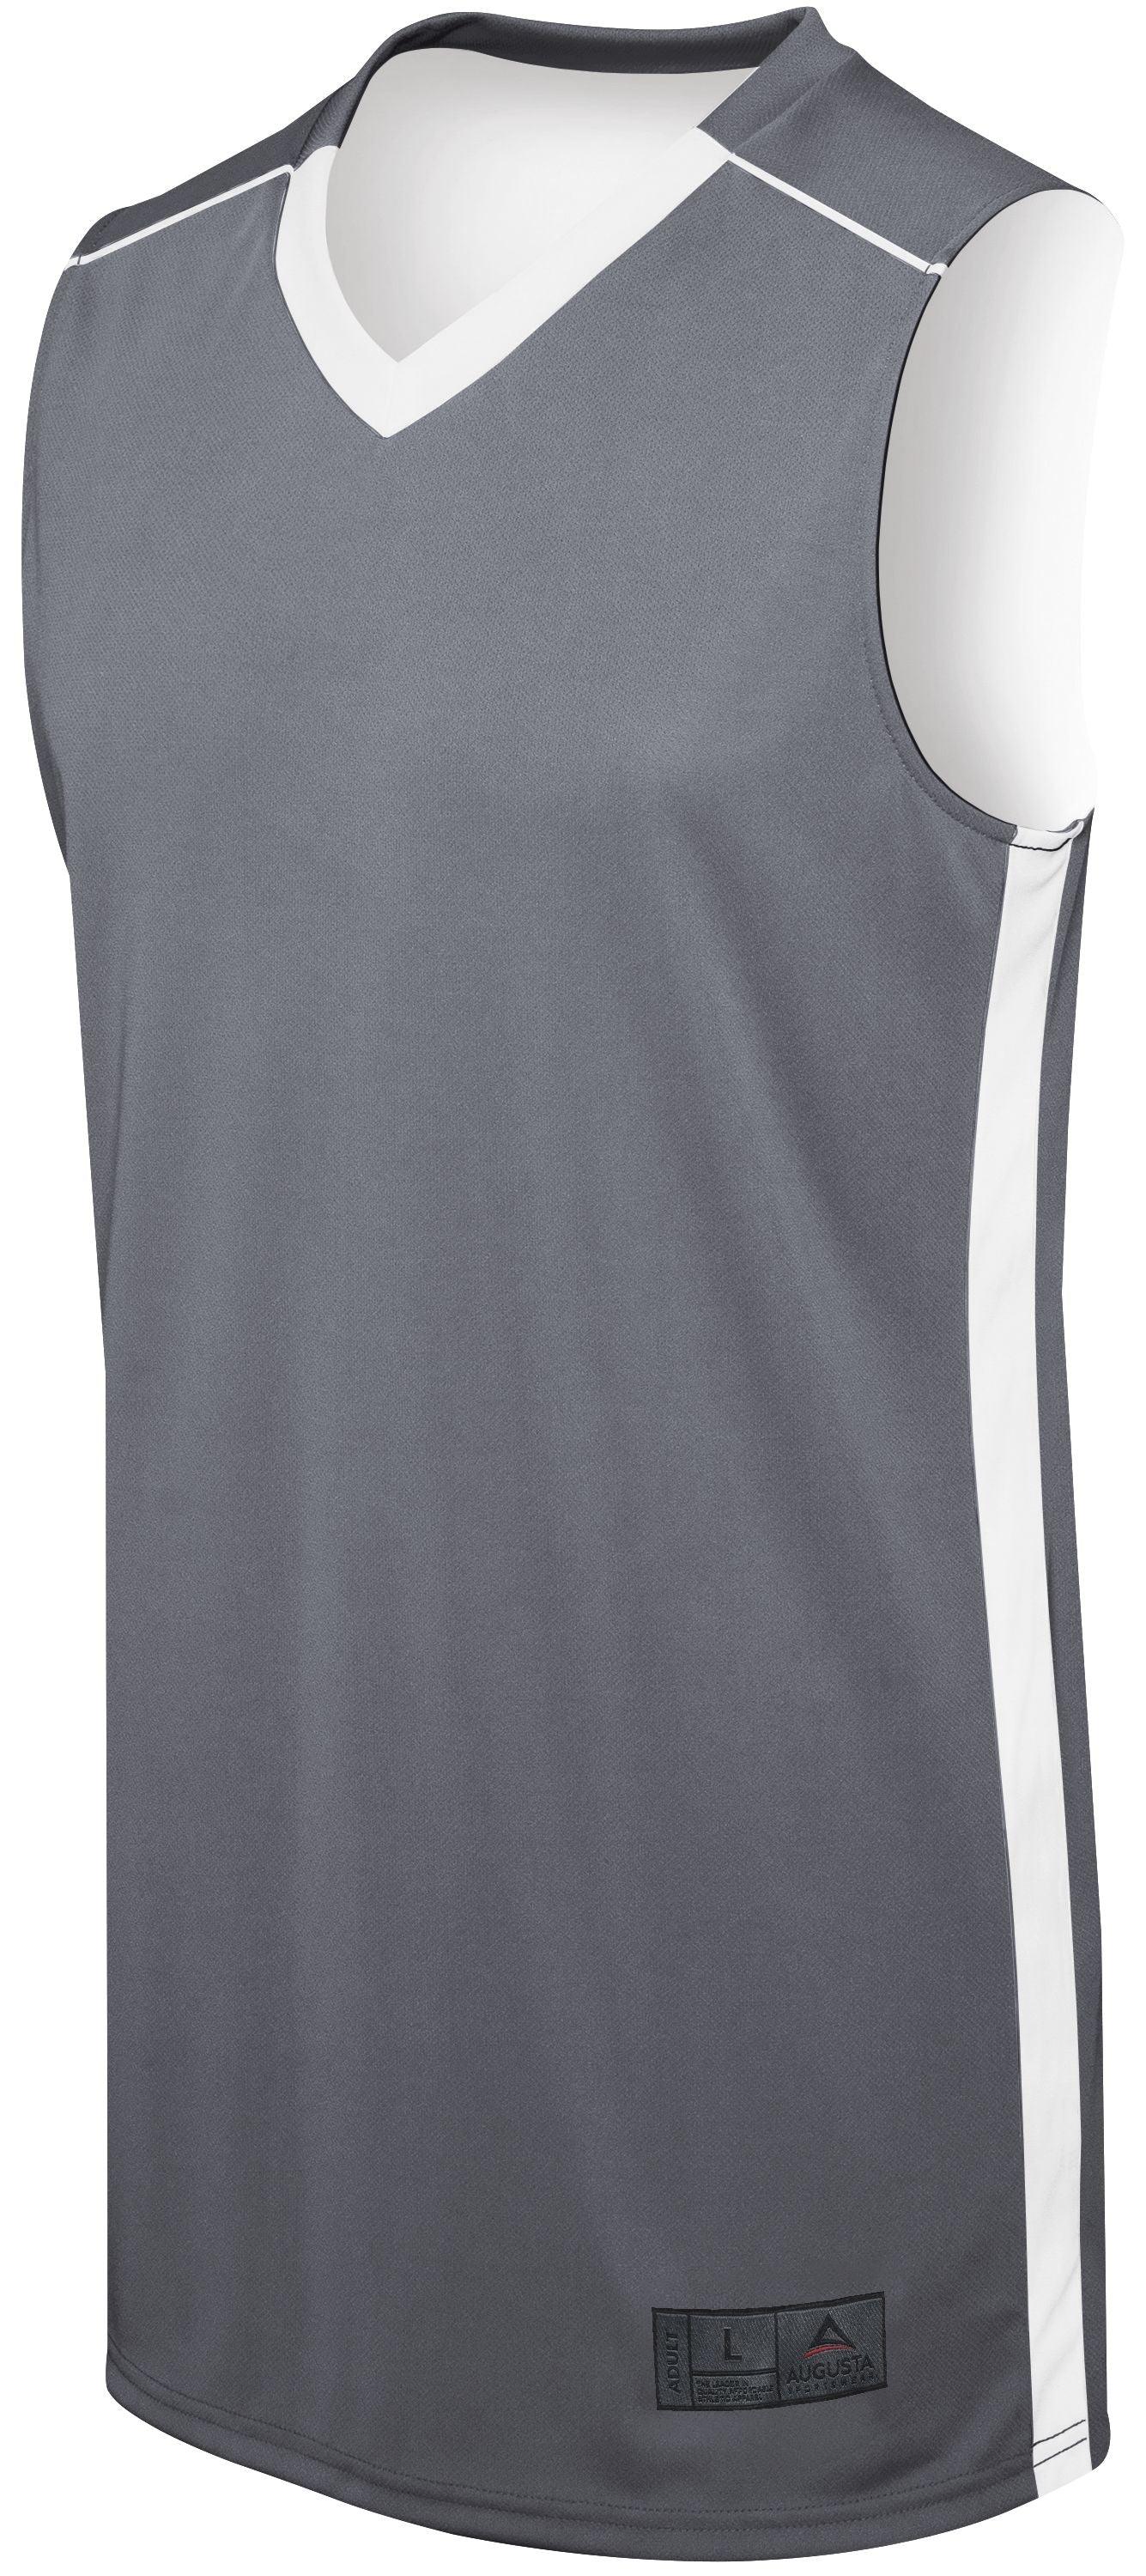 Adult Competition Reversible Jersey - Dresses Max